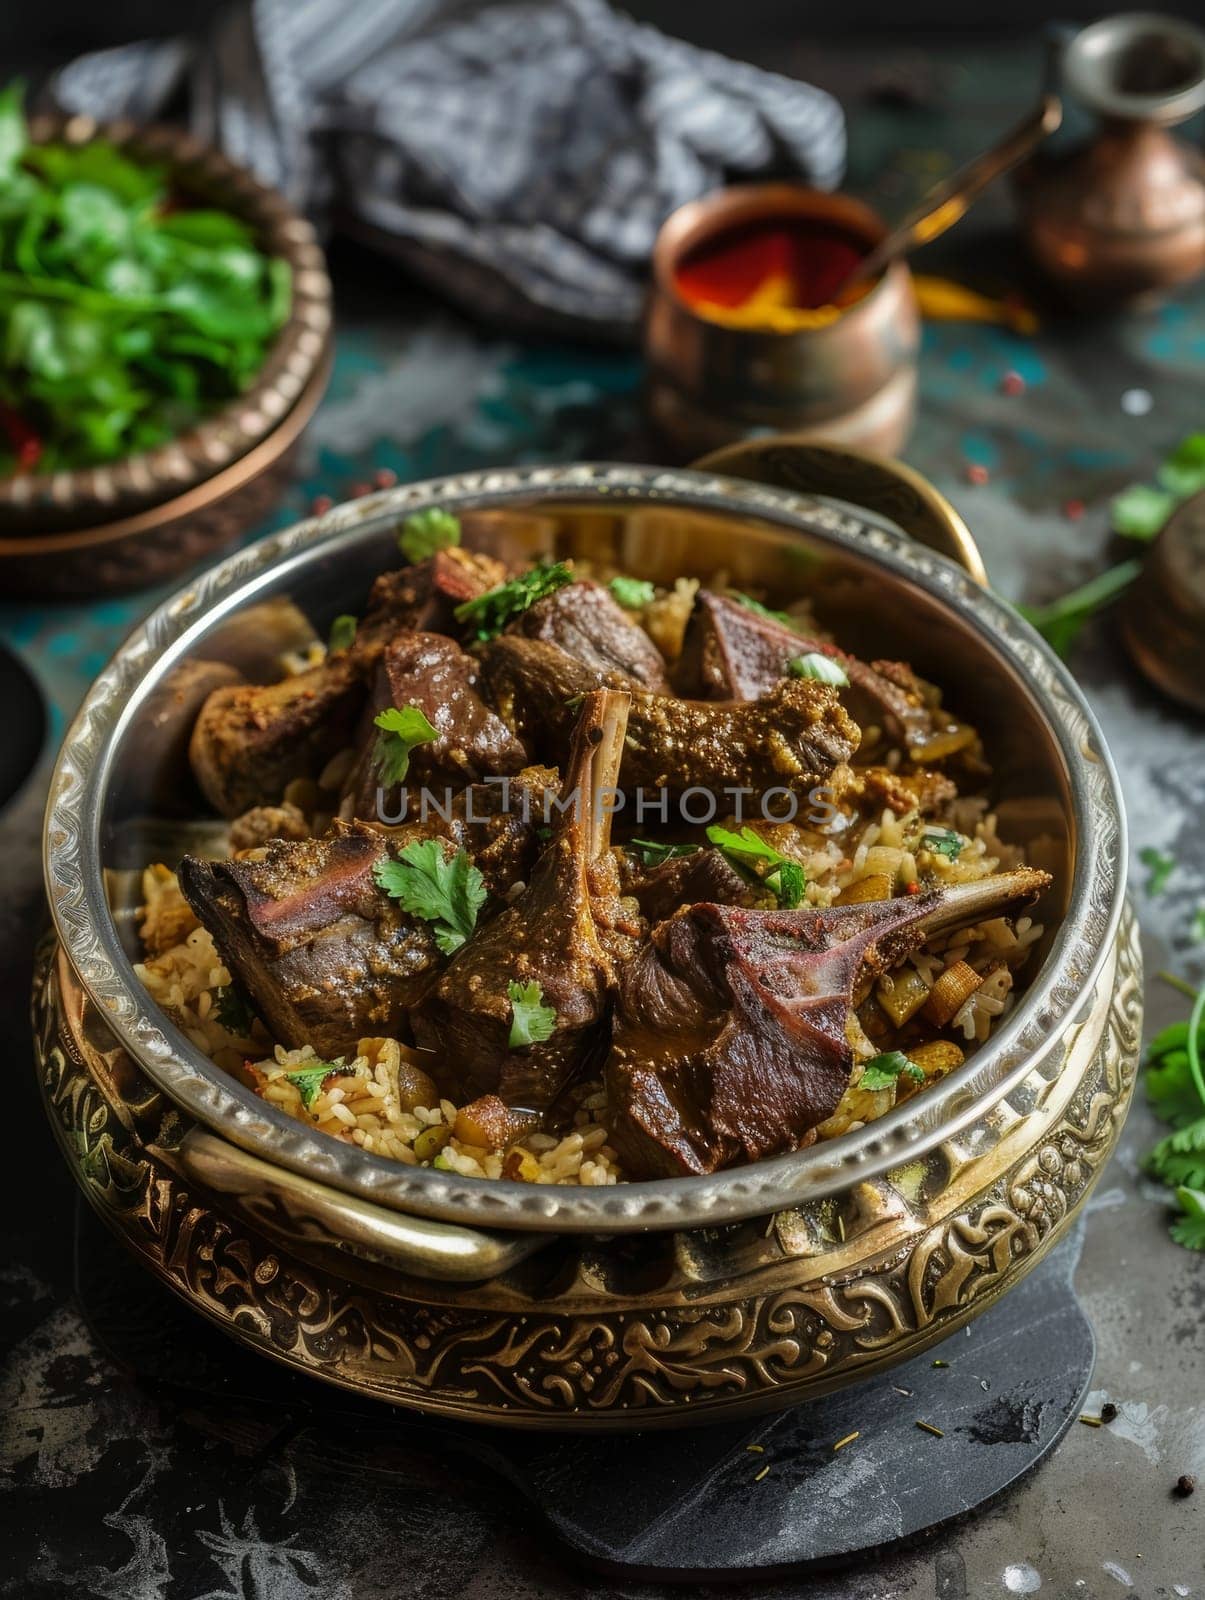 Omani shuwa, a traditional slow-roasted lamb dish marinated in a rich blend of Middle Eastern spices, served in an authentic earthenware serving pot. This savory, tender meat dish of Oman